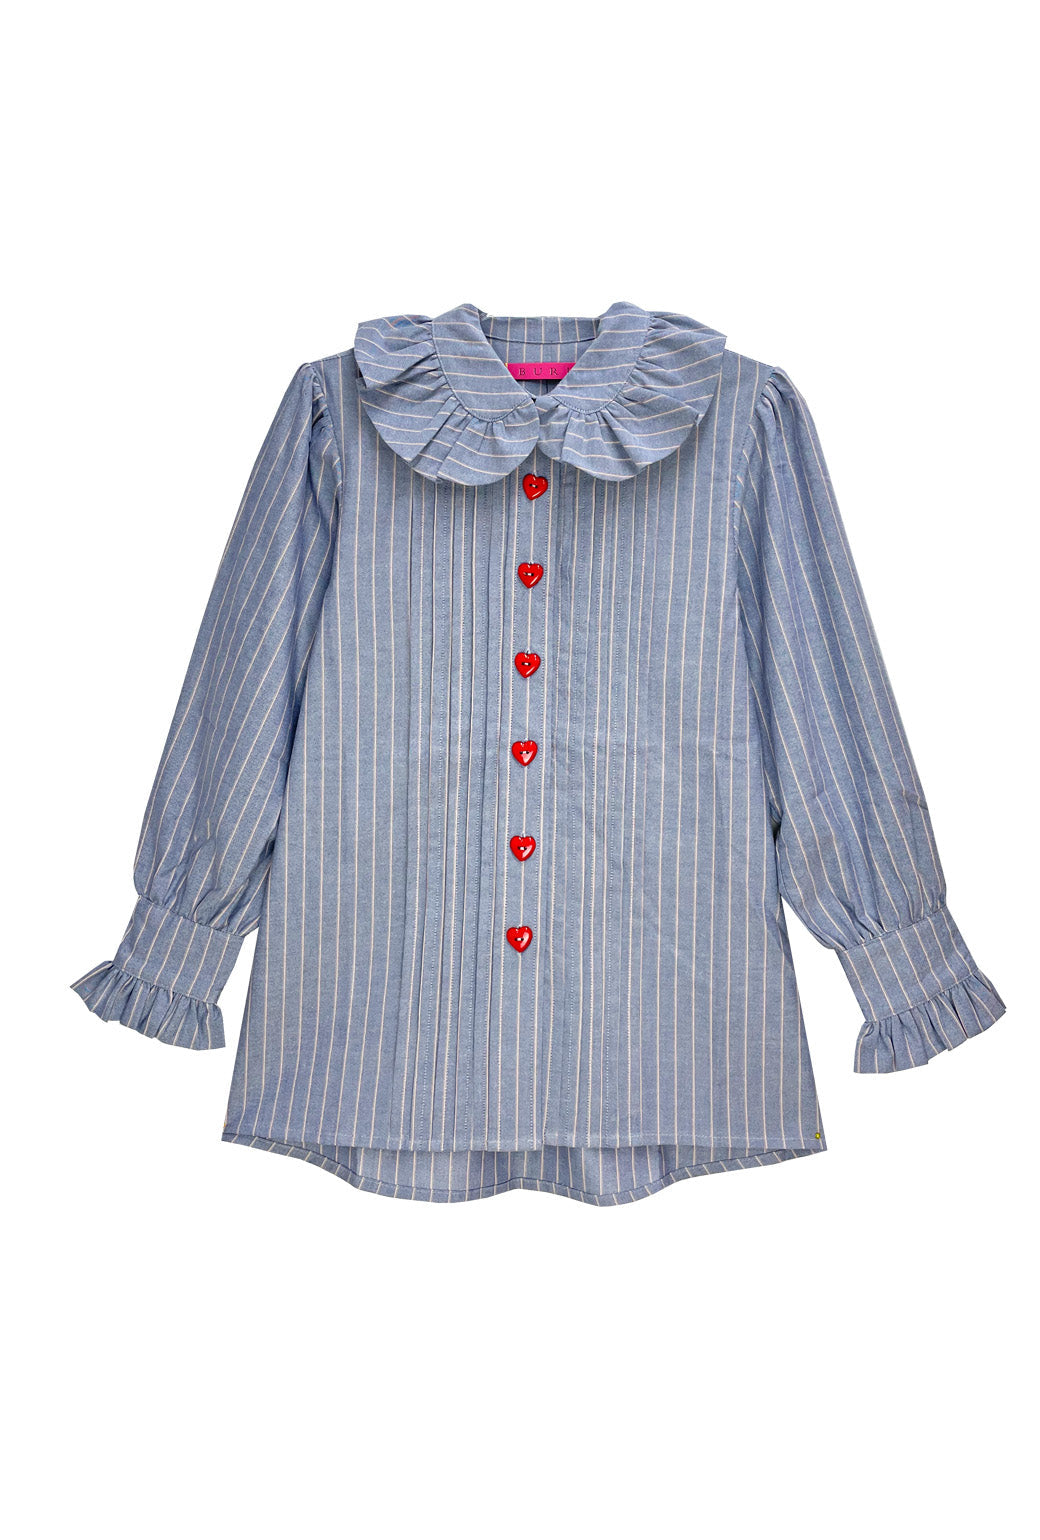 Ruffle Collar Blouse - Blue and Red Oxford